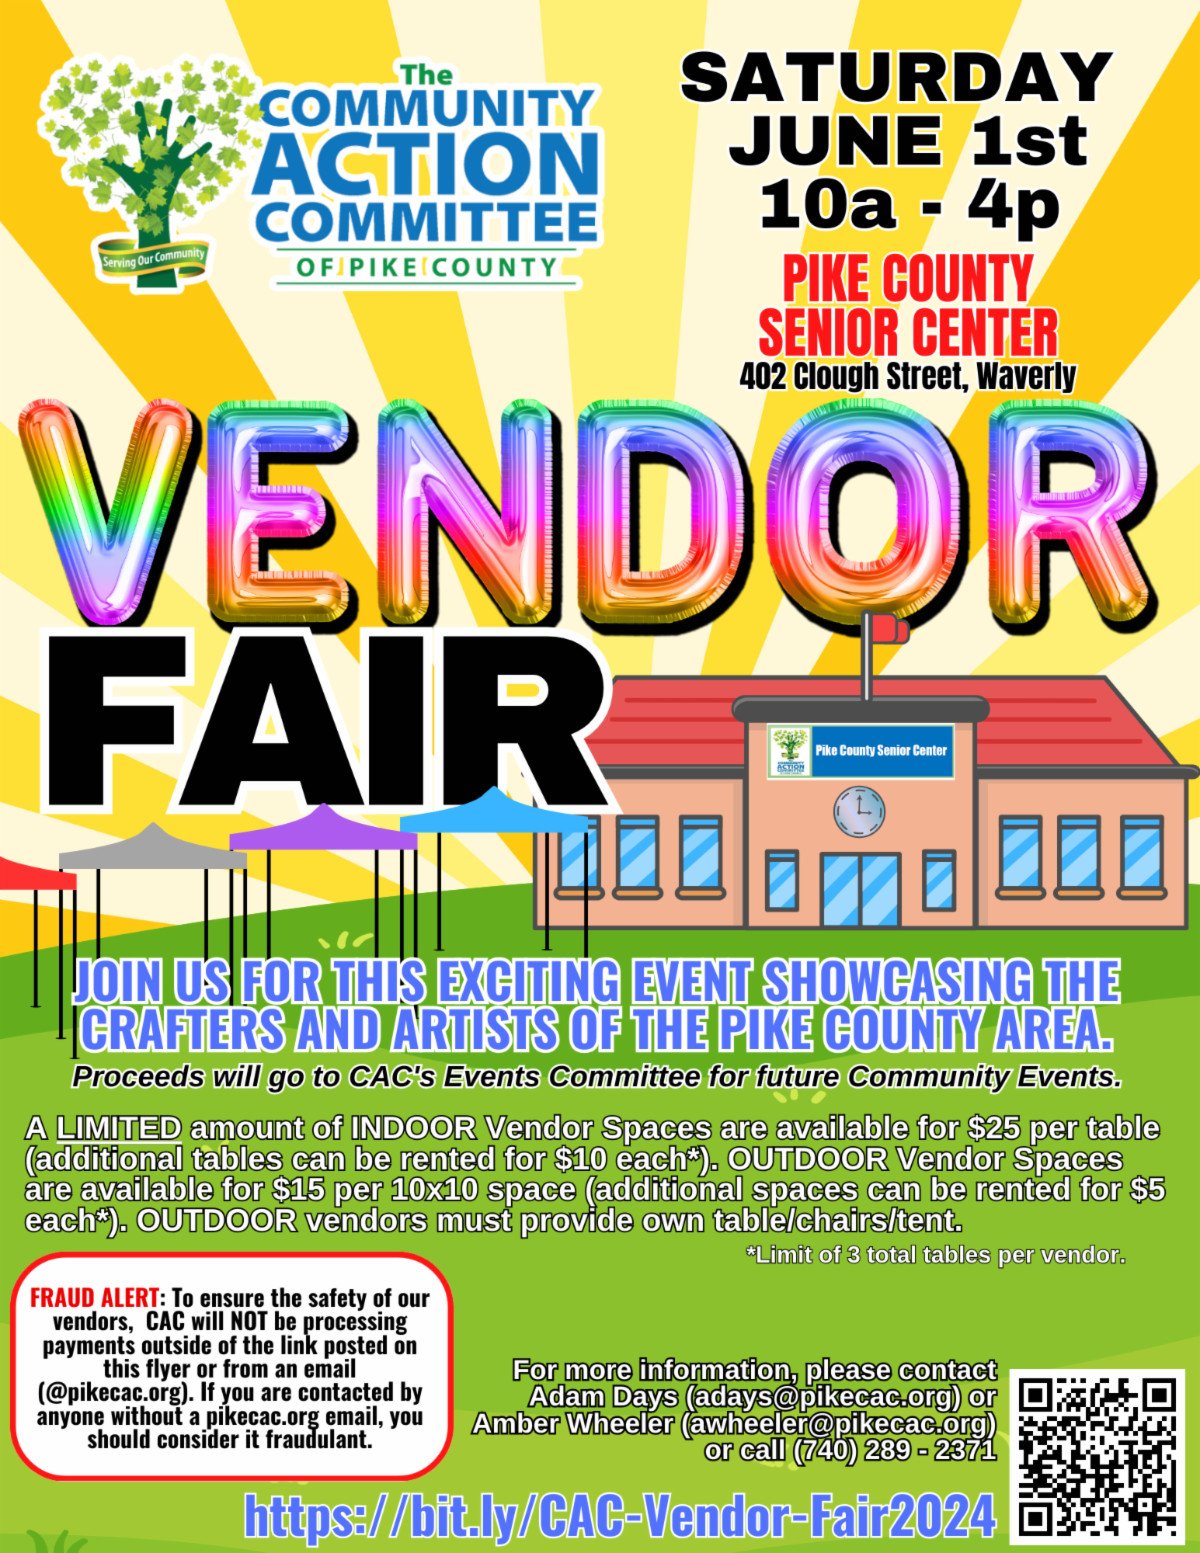   Community Action Committee    Vendor Fair    Saturday, June 1    10:00 AM - 4:00 PM    Pike County Senior Center    402 Clough St.    Waverly, OH  